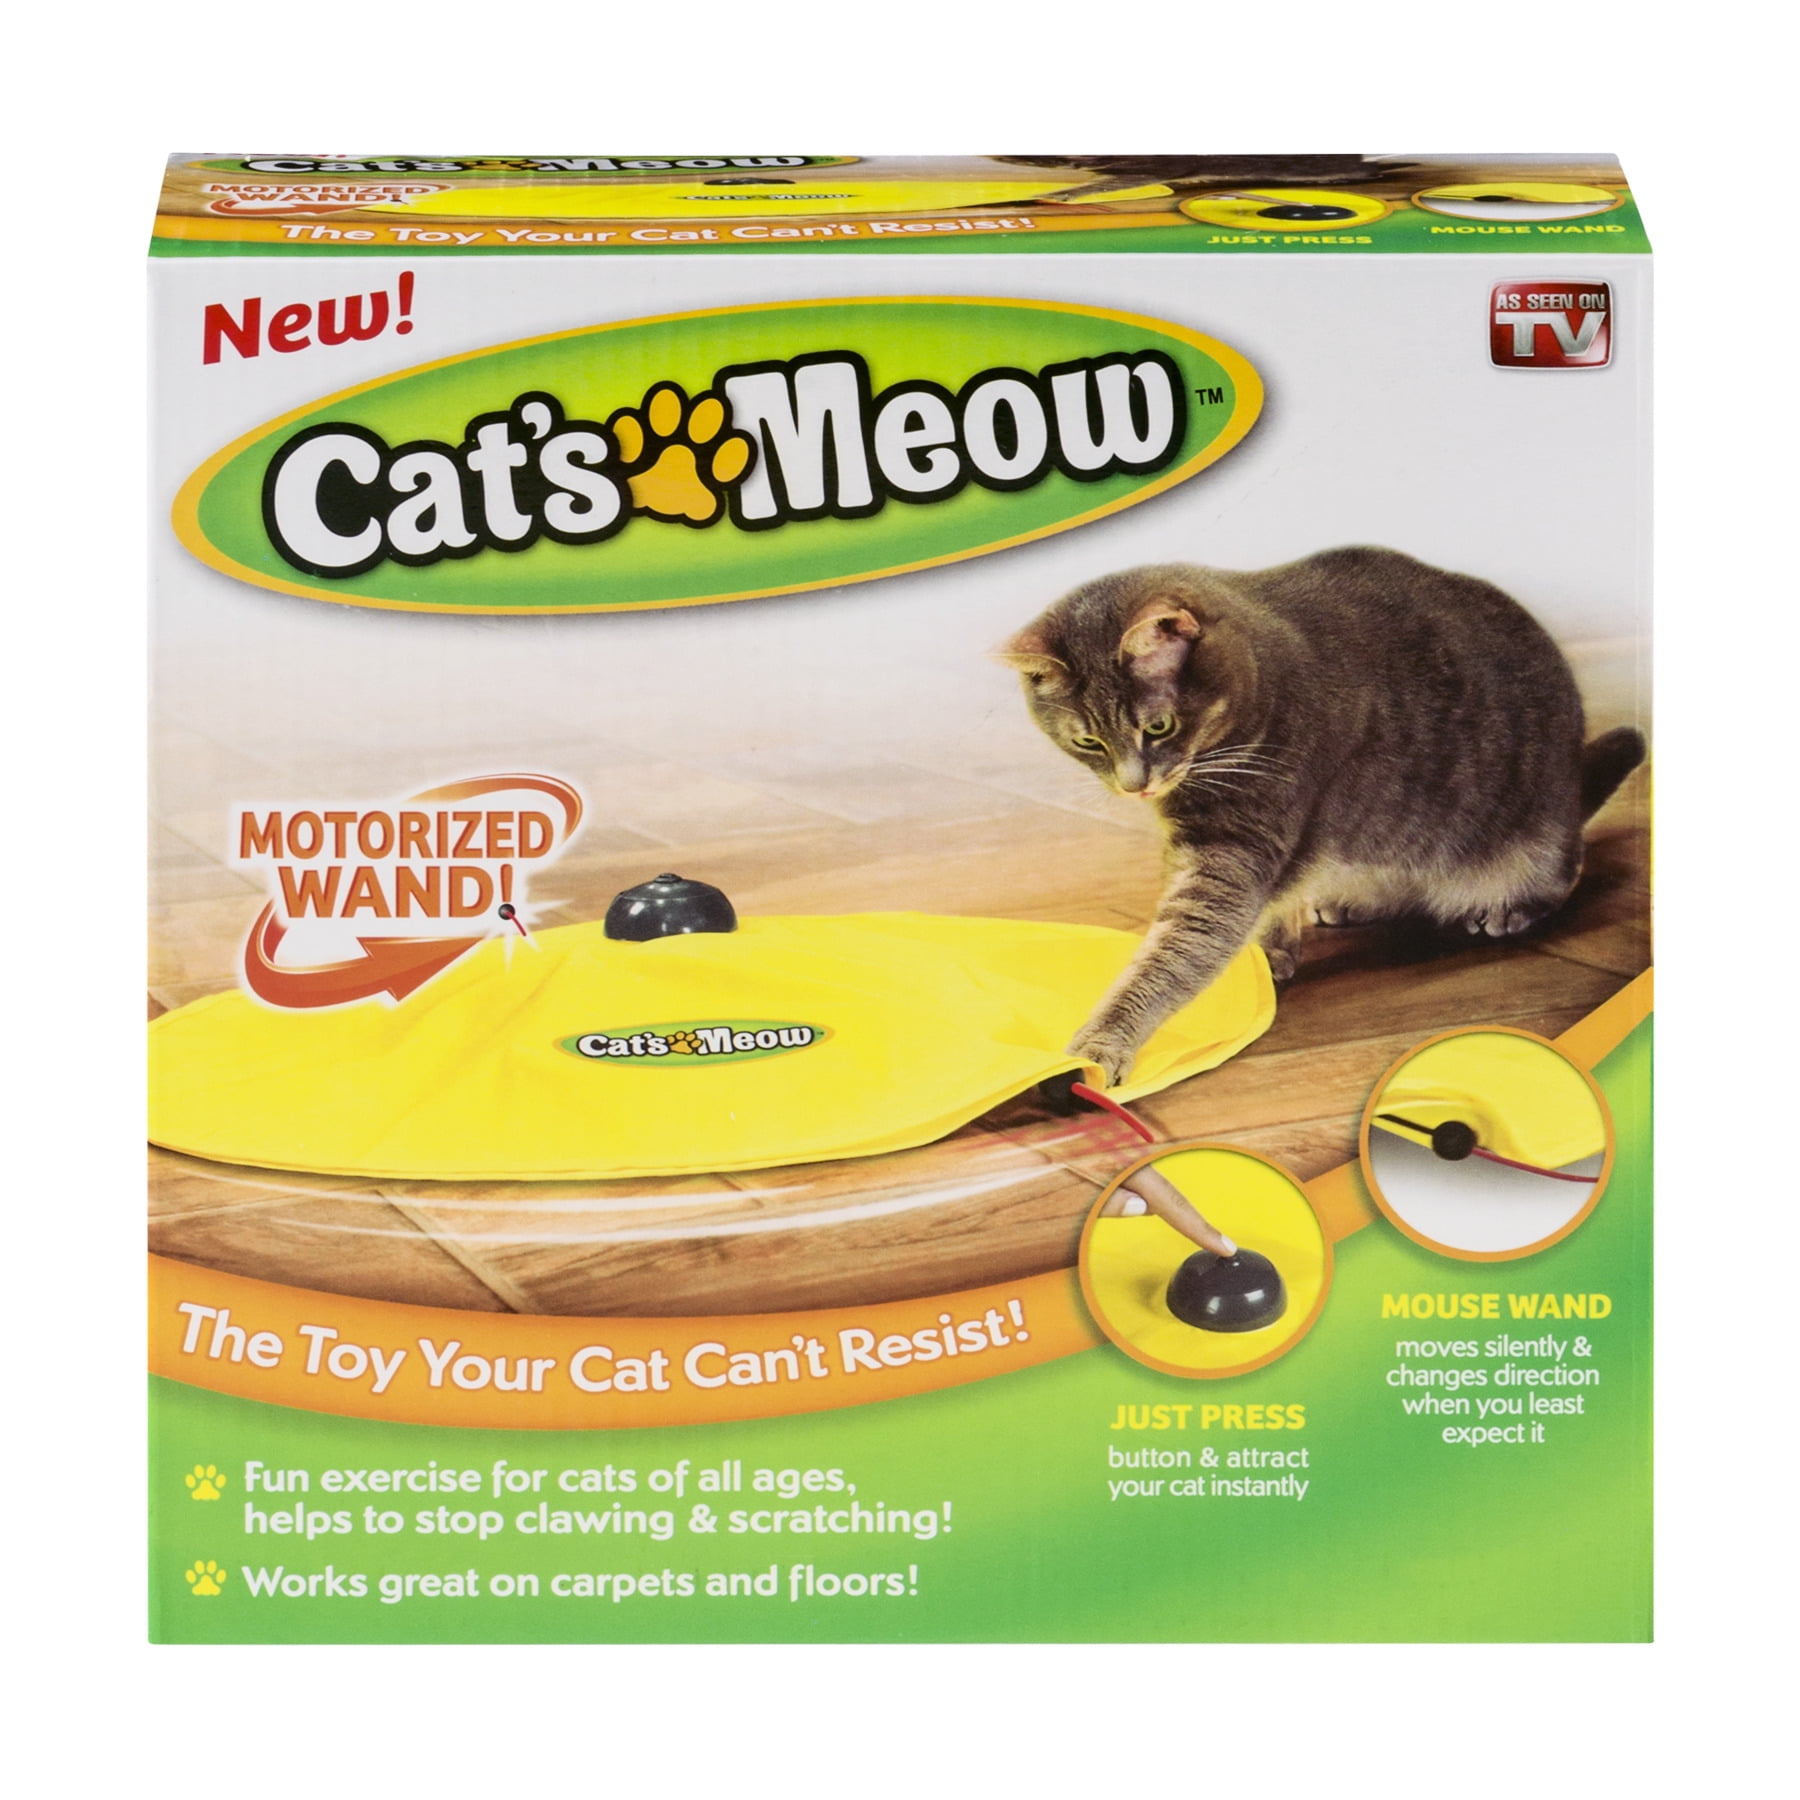 cat's meow toy replacement parts